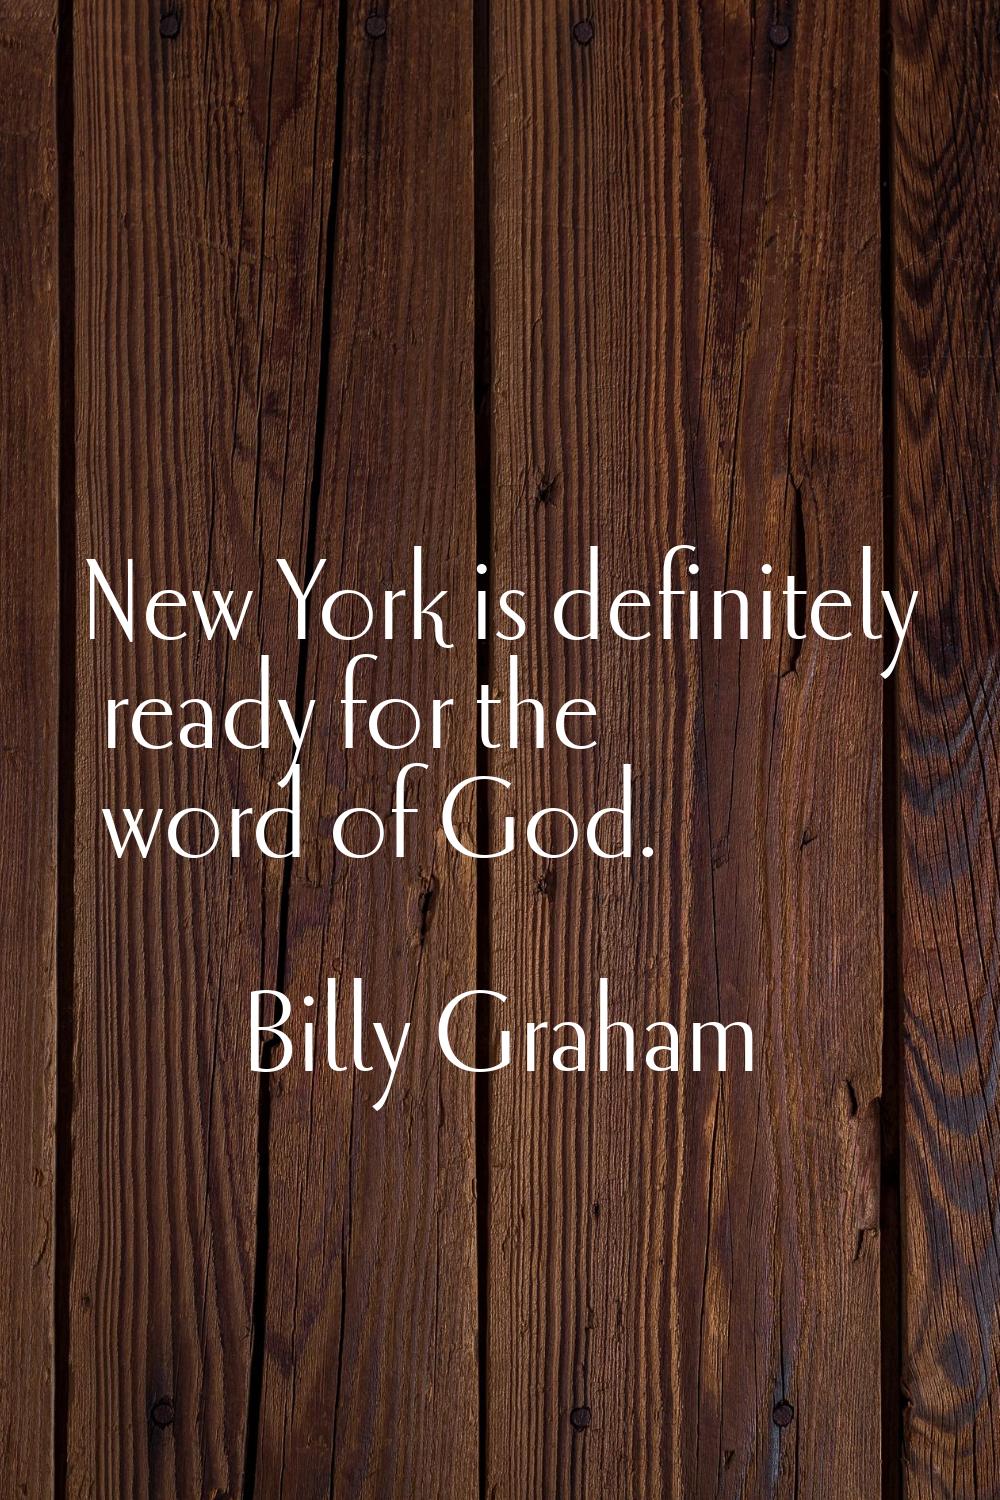 New York is definitely ready for the word of God.